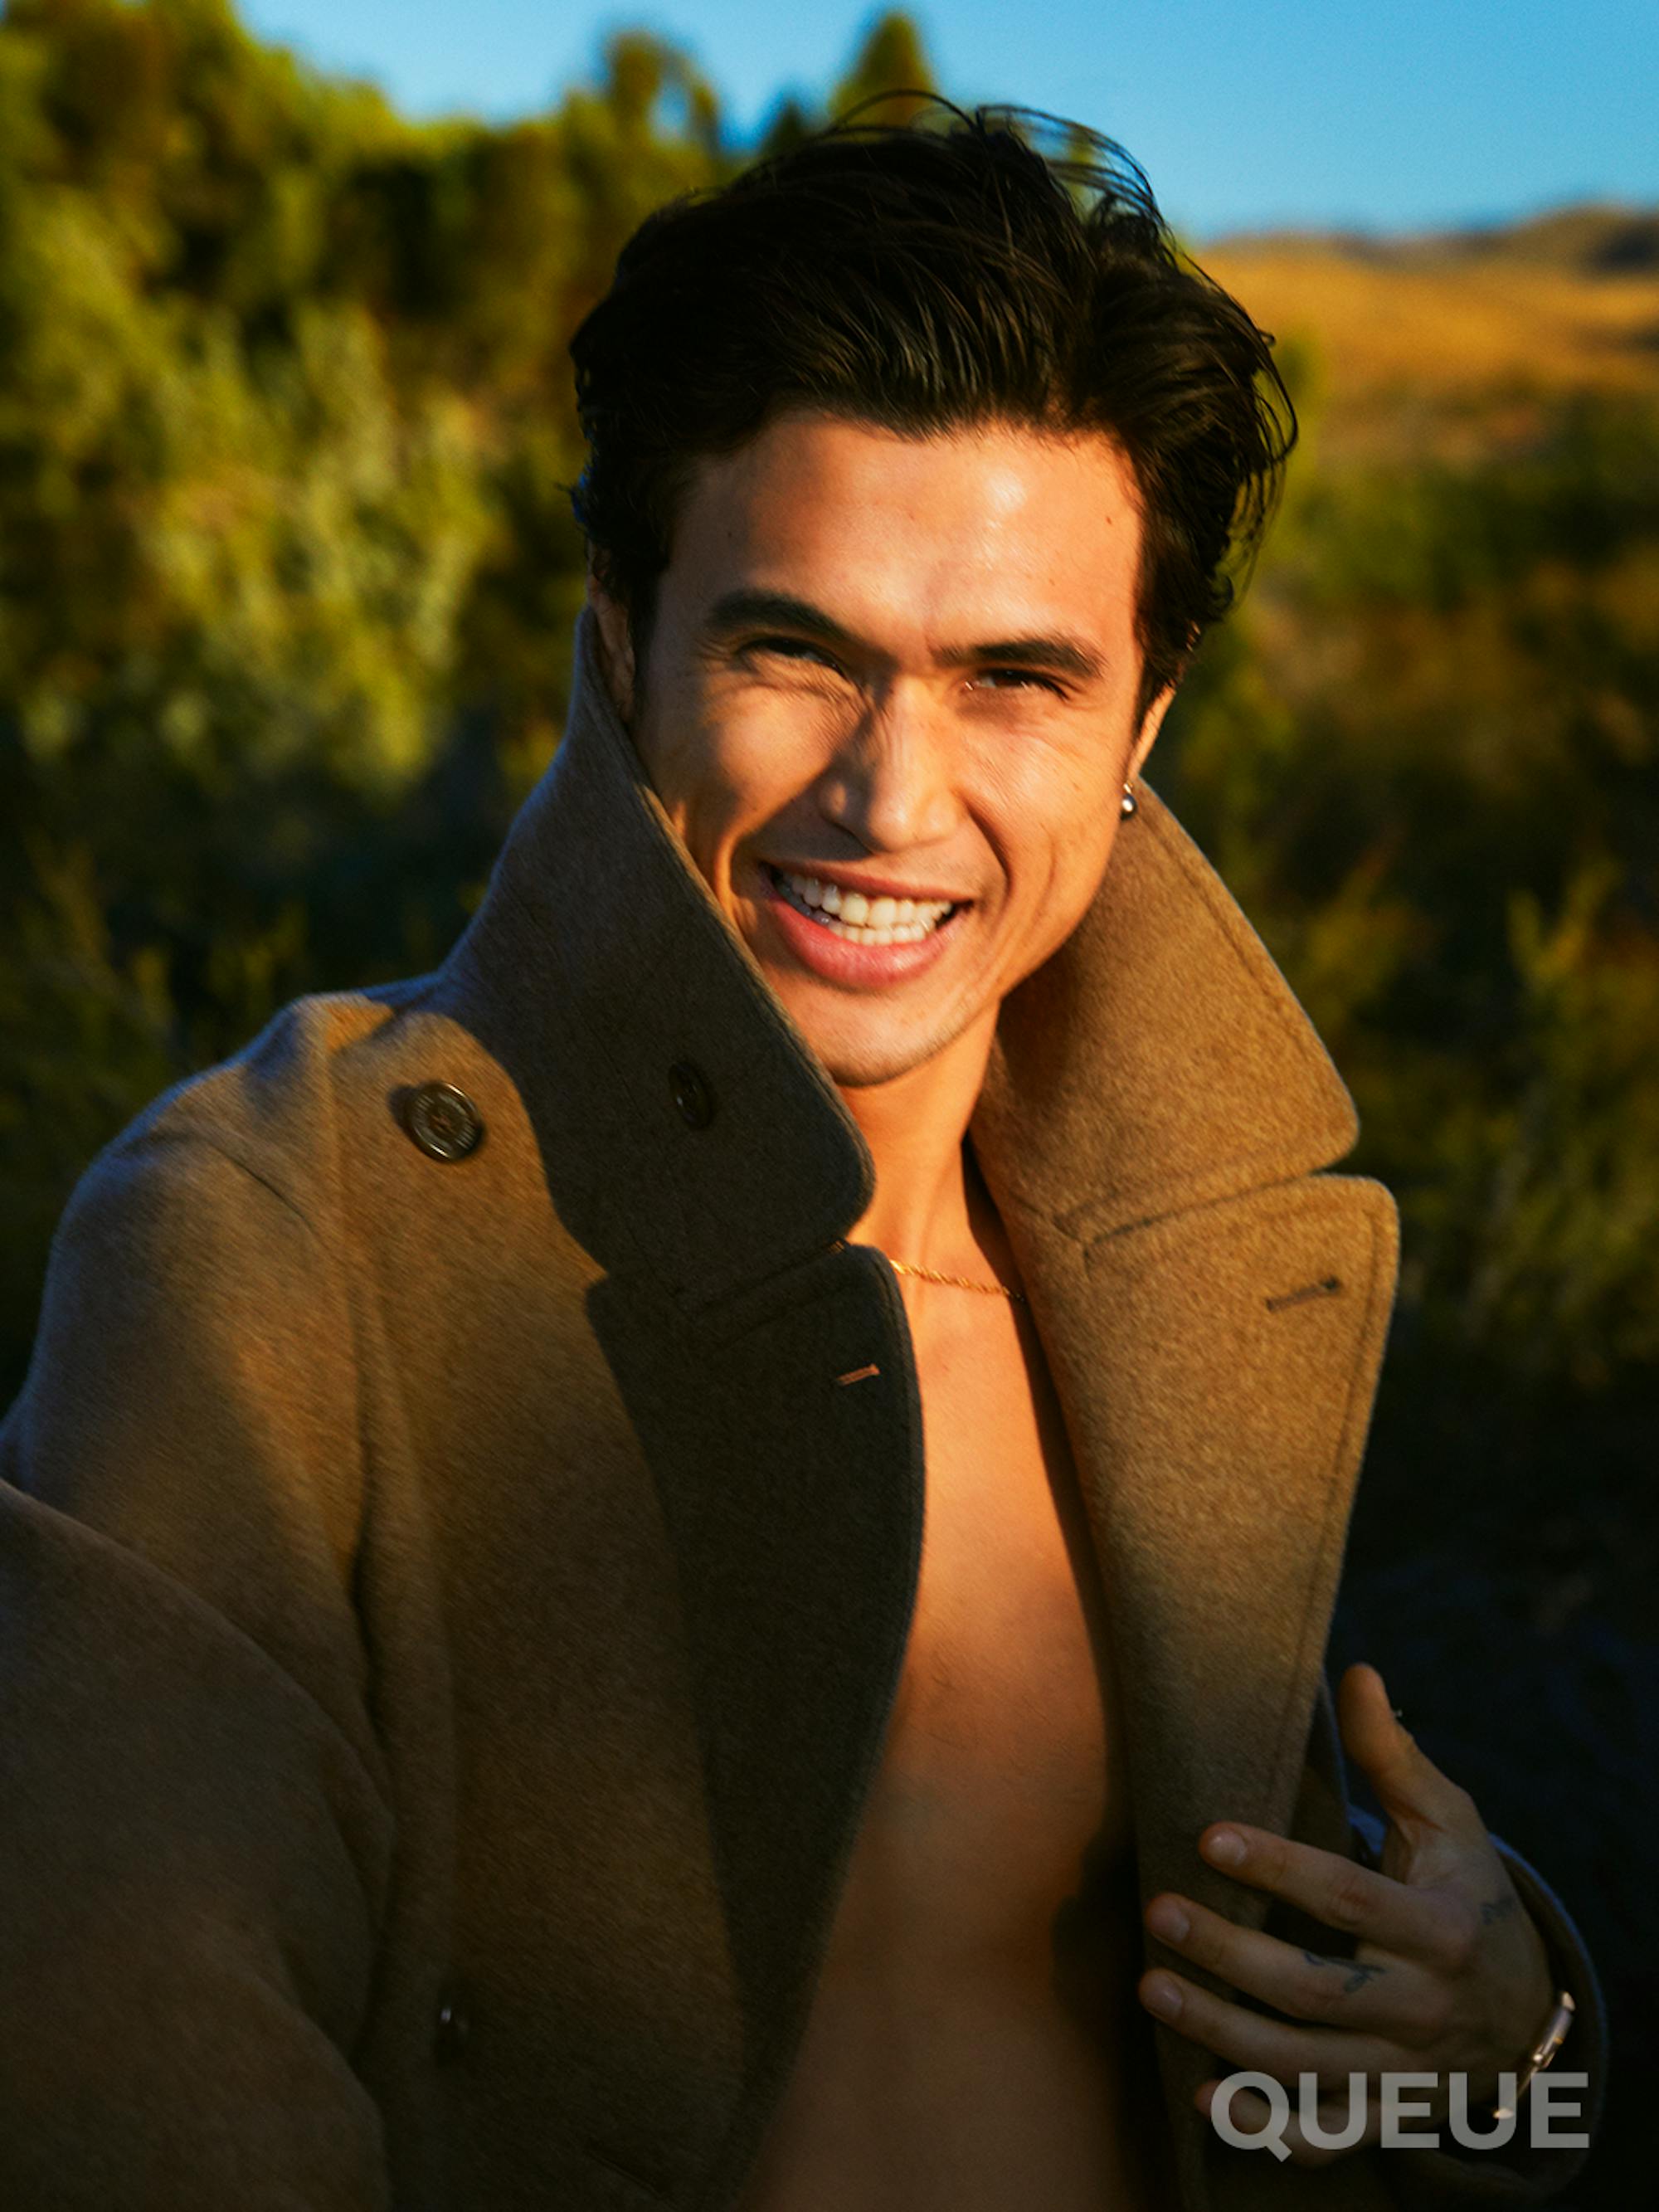 Charles Melton lets loose with a smile and his jacket collar popped.